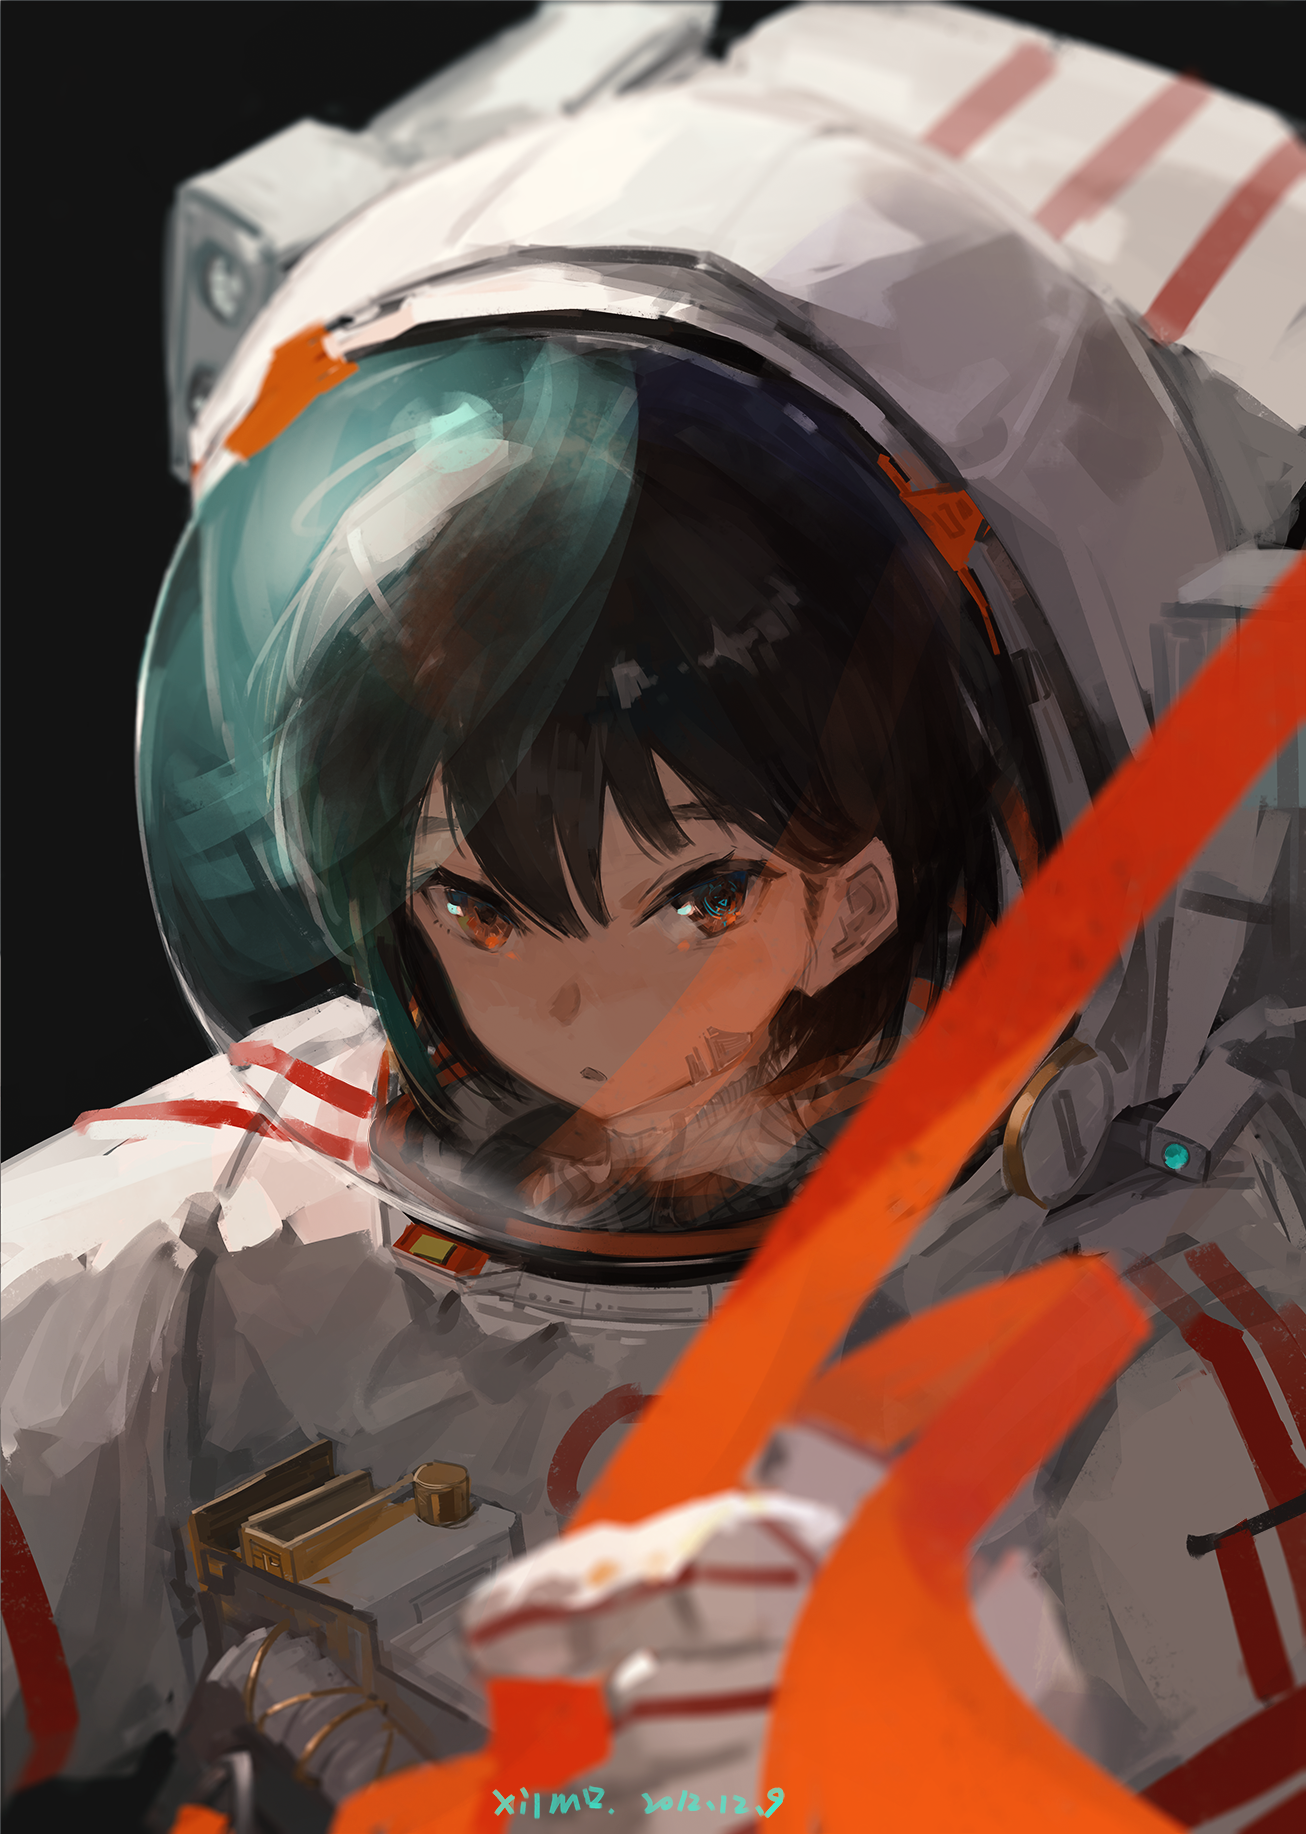 astronaut standing at mountain in anime style